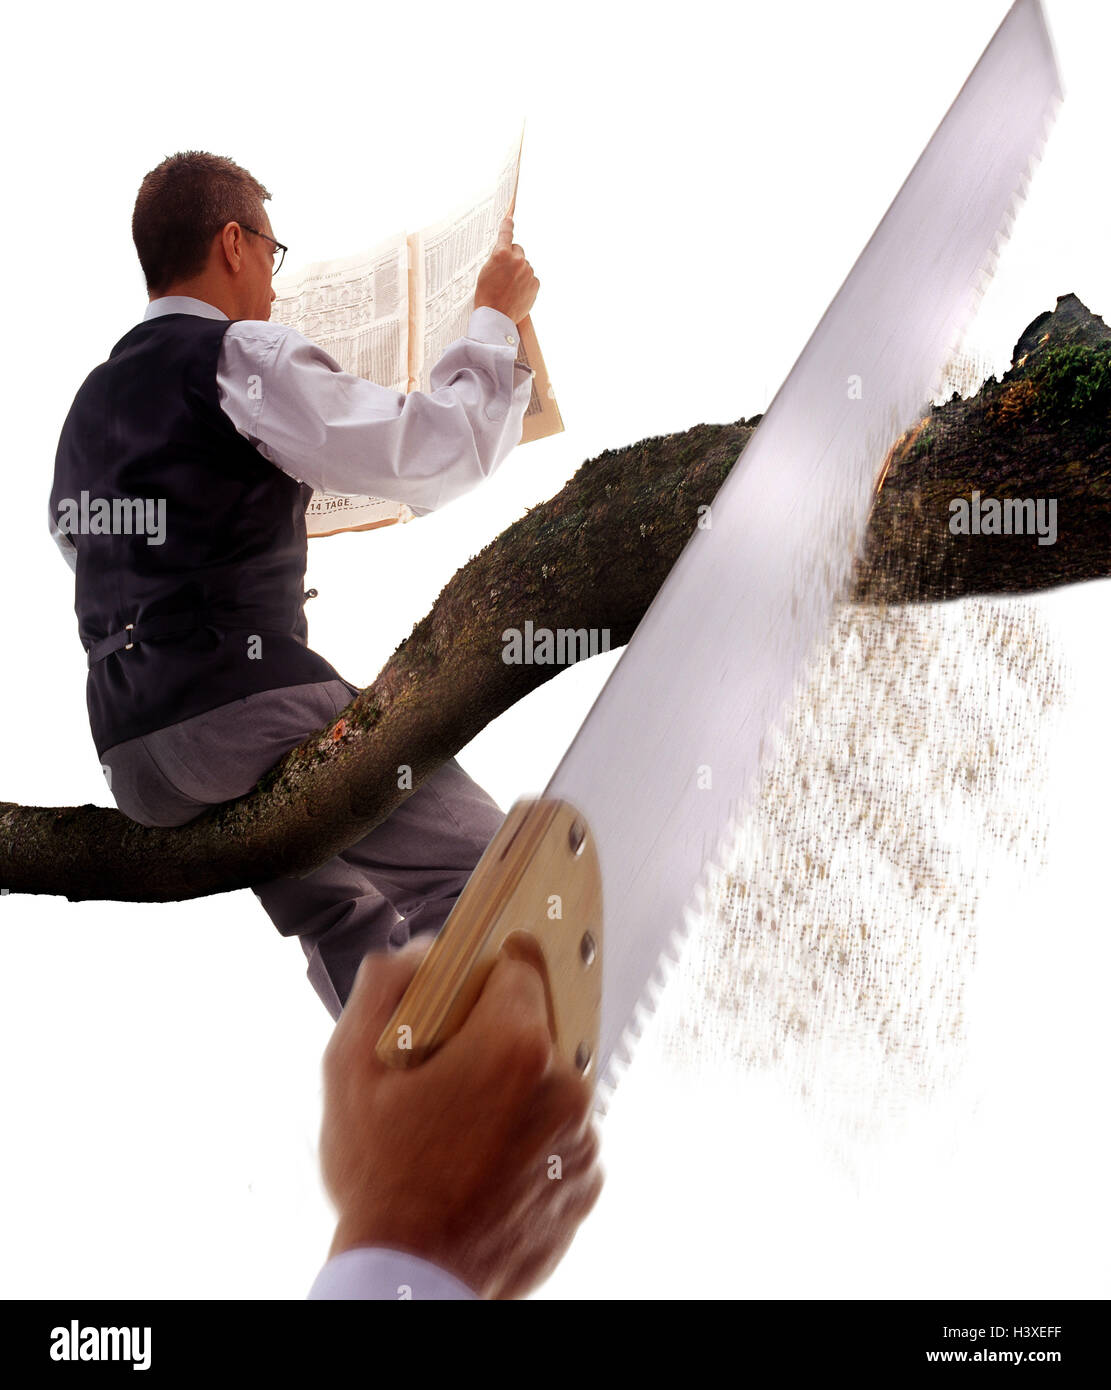 Hand, saw, branch, 'saw off', man, sit, read concepts, competition, loser, contention, relegation, notice, dismissal, harassment, saw, business, unfair, competitors, conflict, studio, cut out Stock Photo